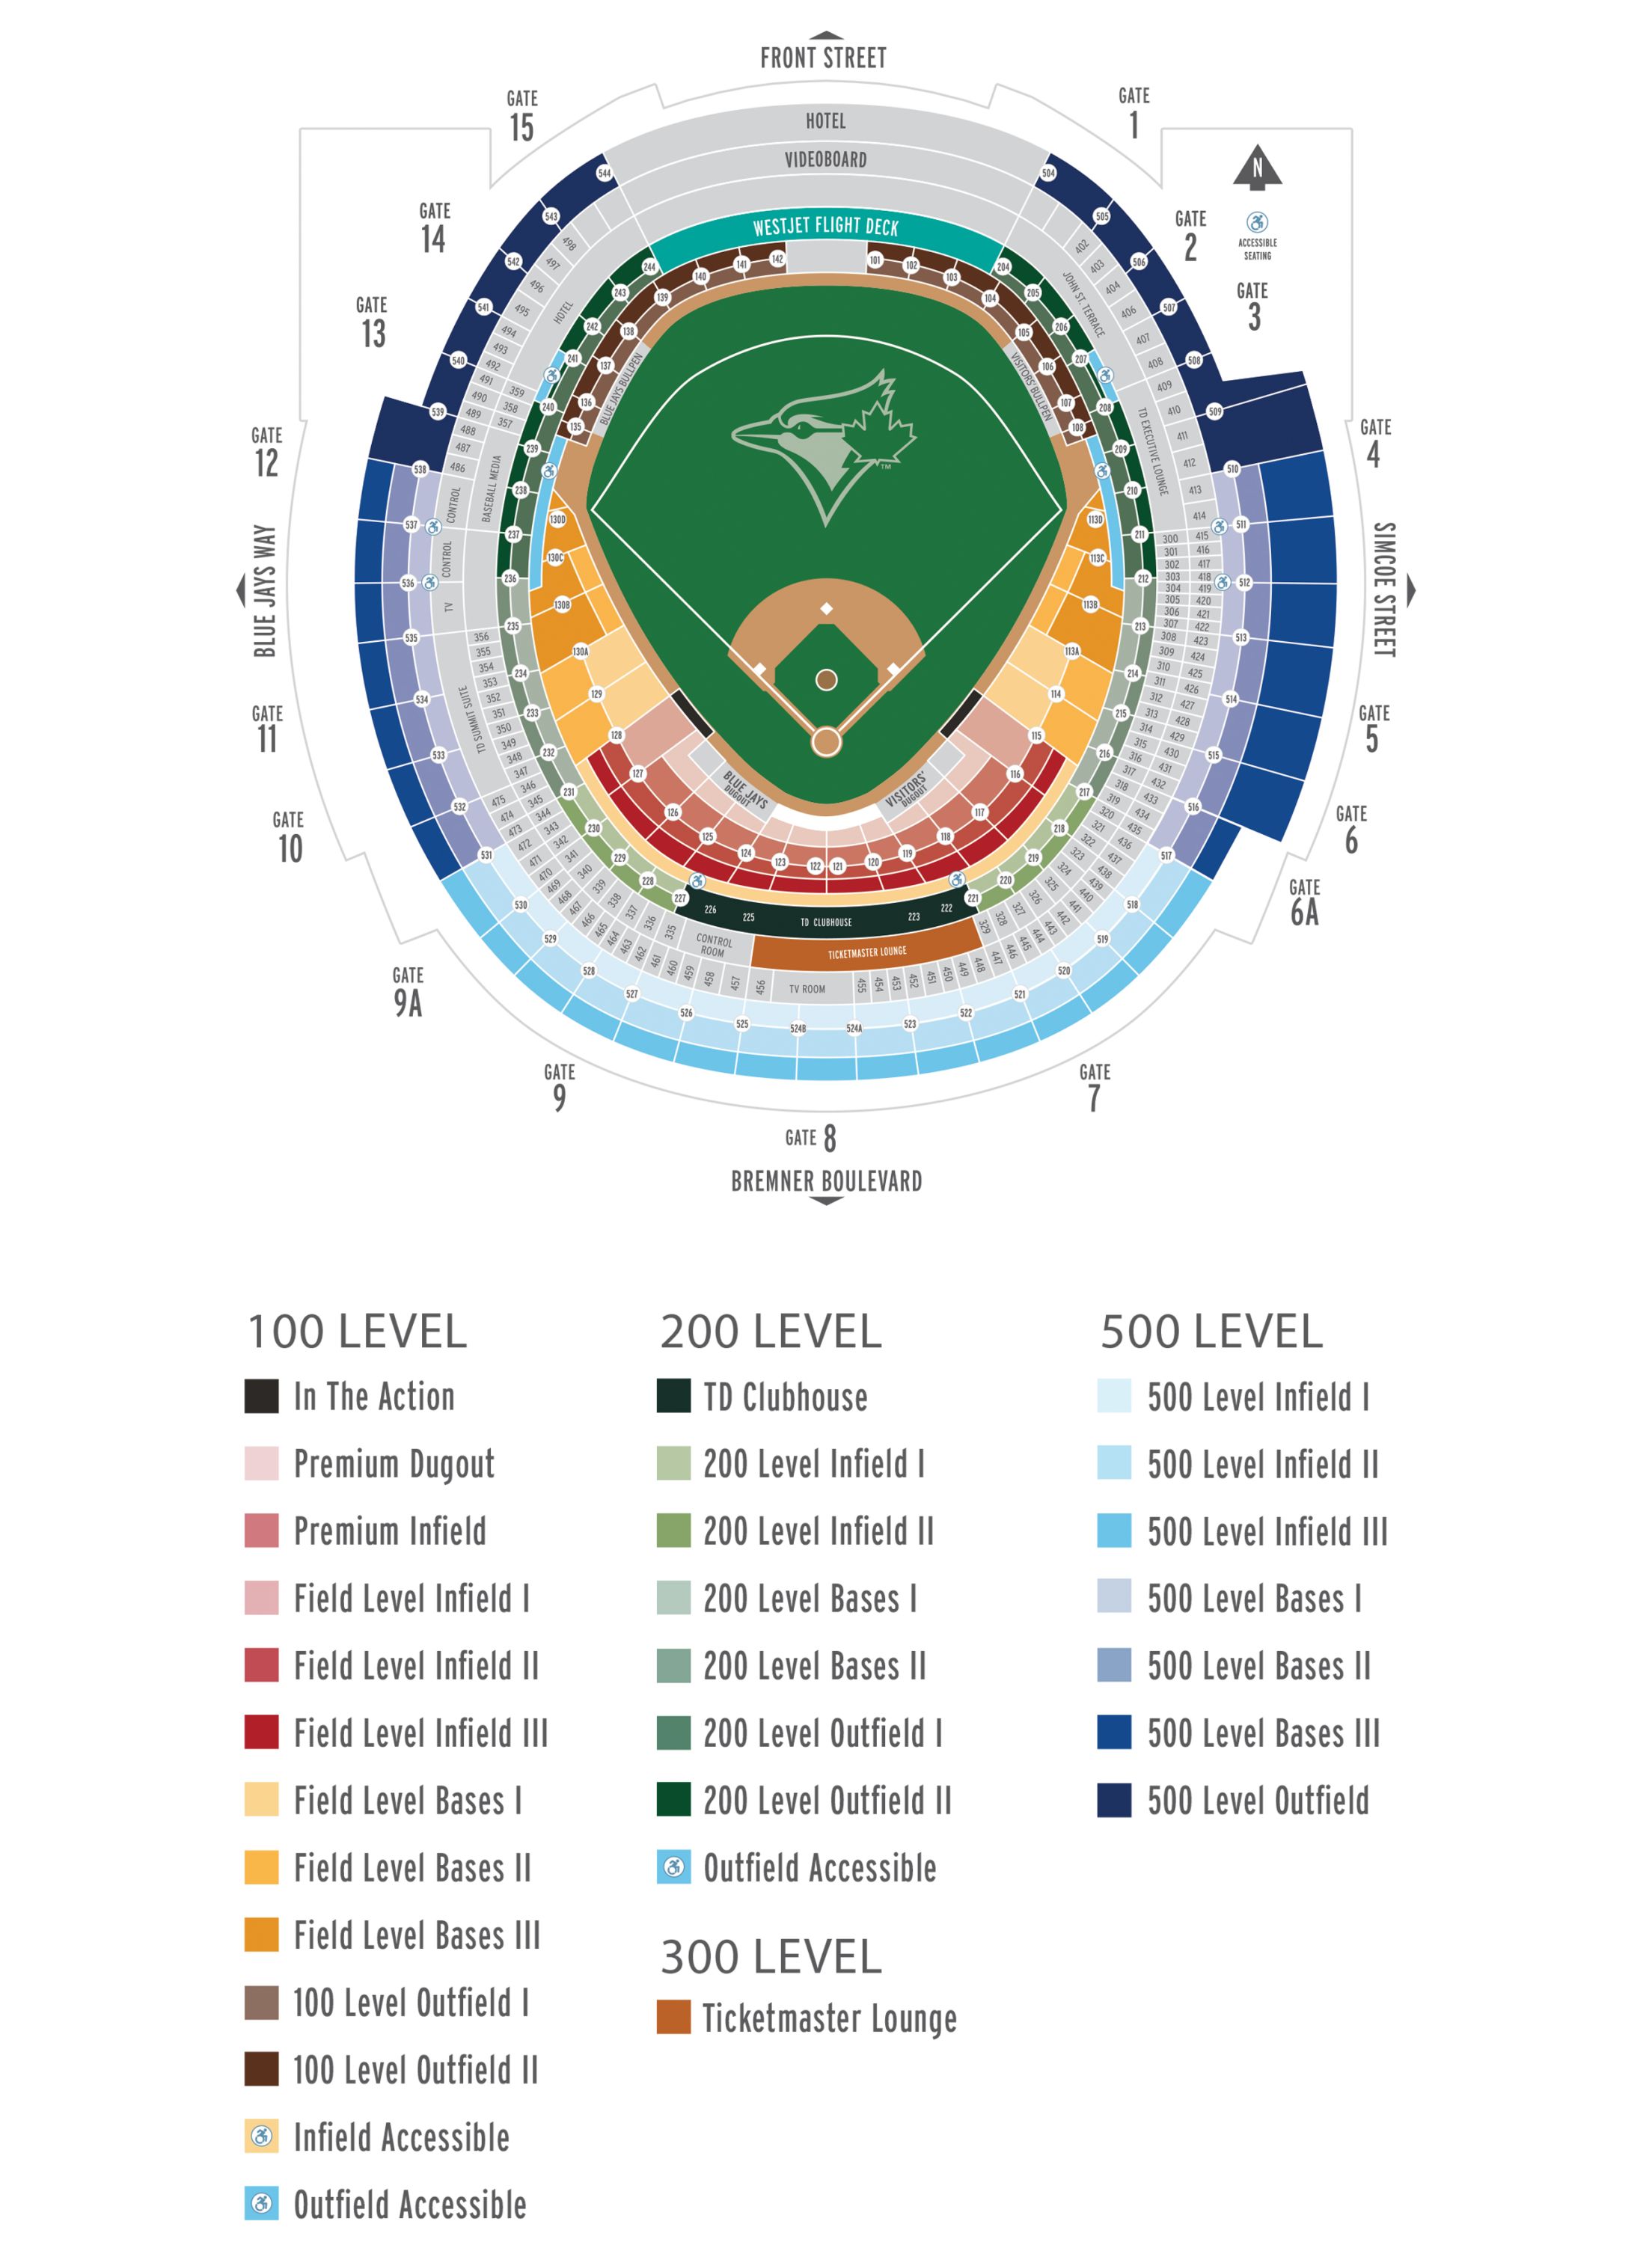 Rogers Centre Toronto Seating Chart With Seat Numbers